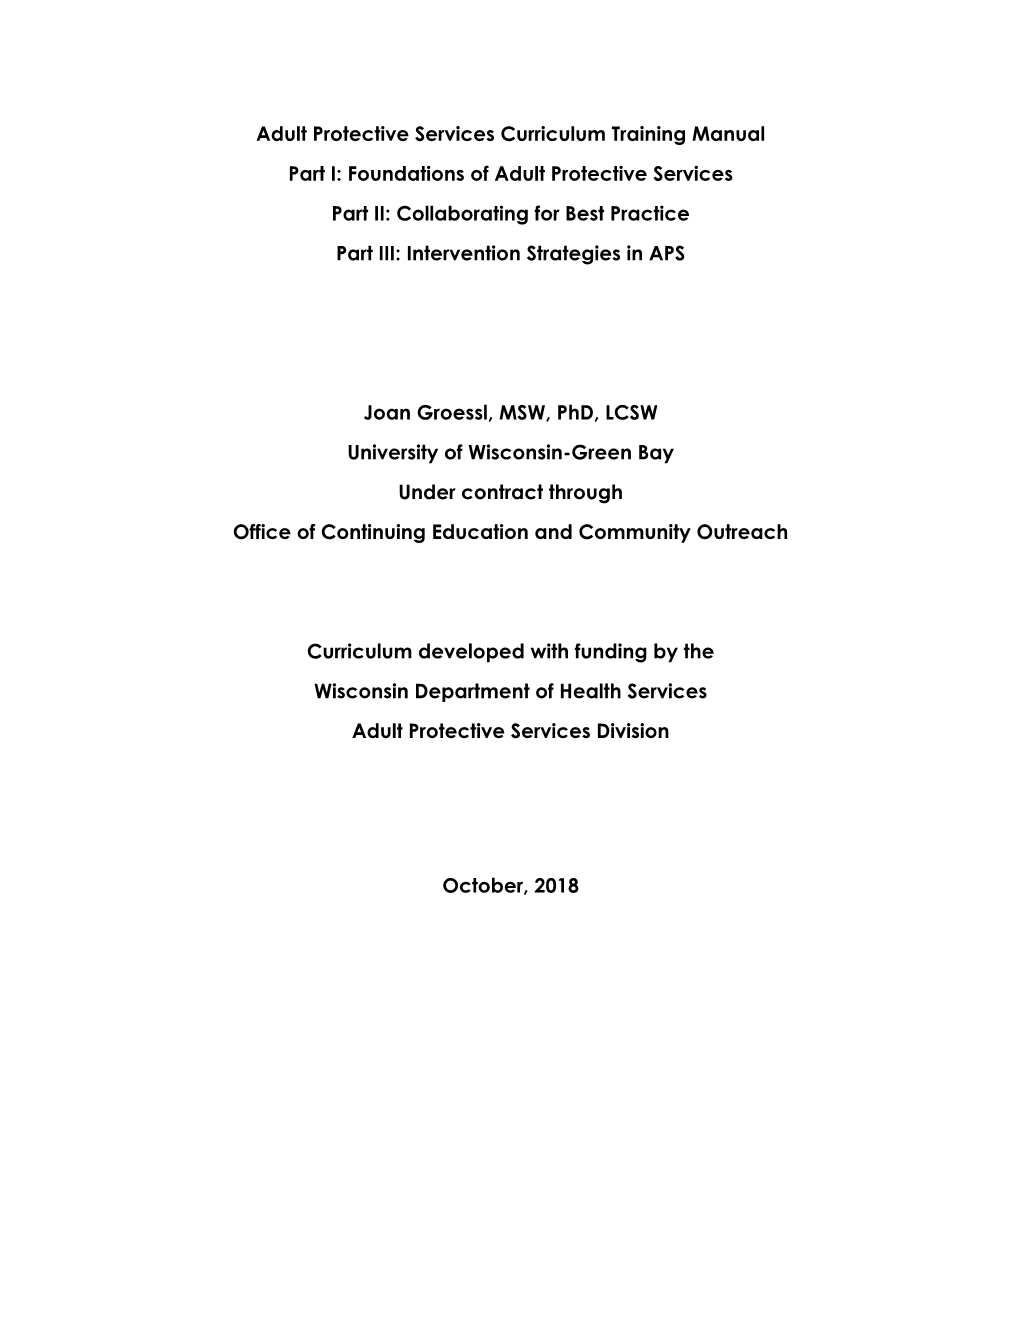 Adult Protective Services Curriculum Training Manual Part I